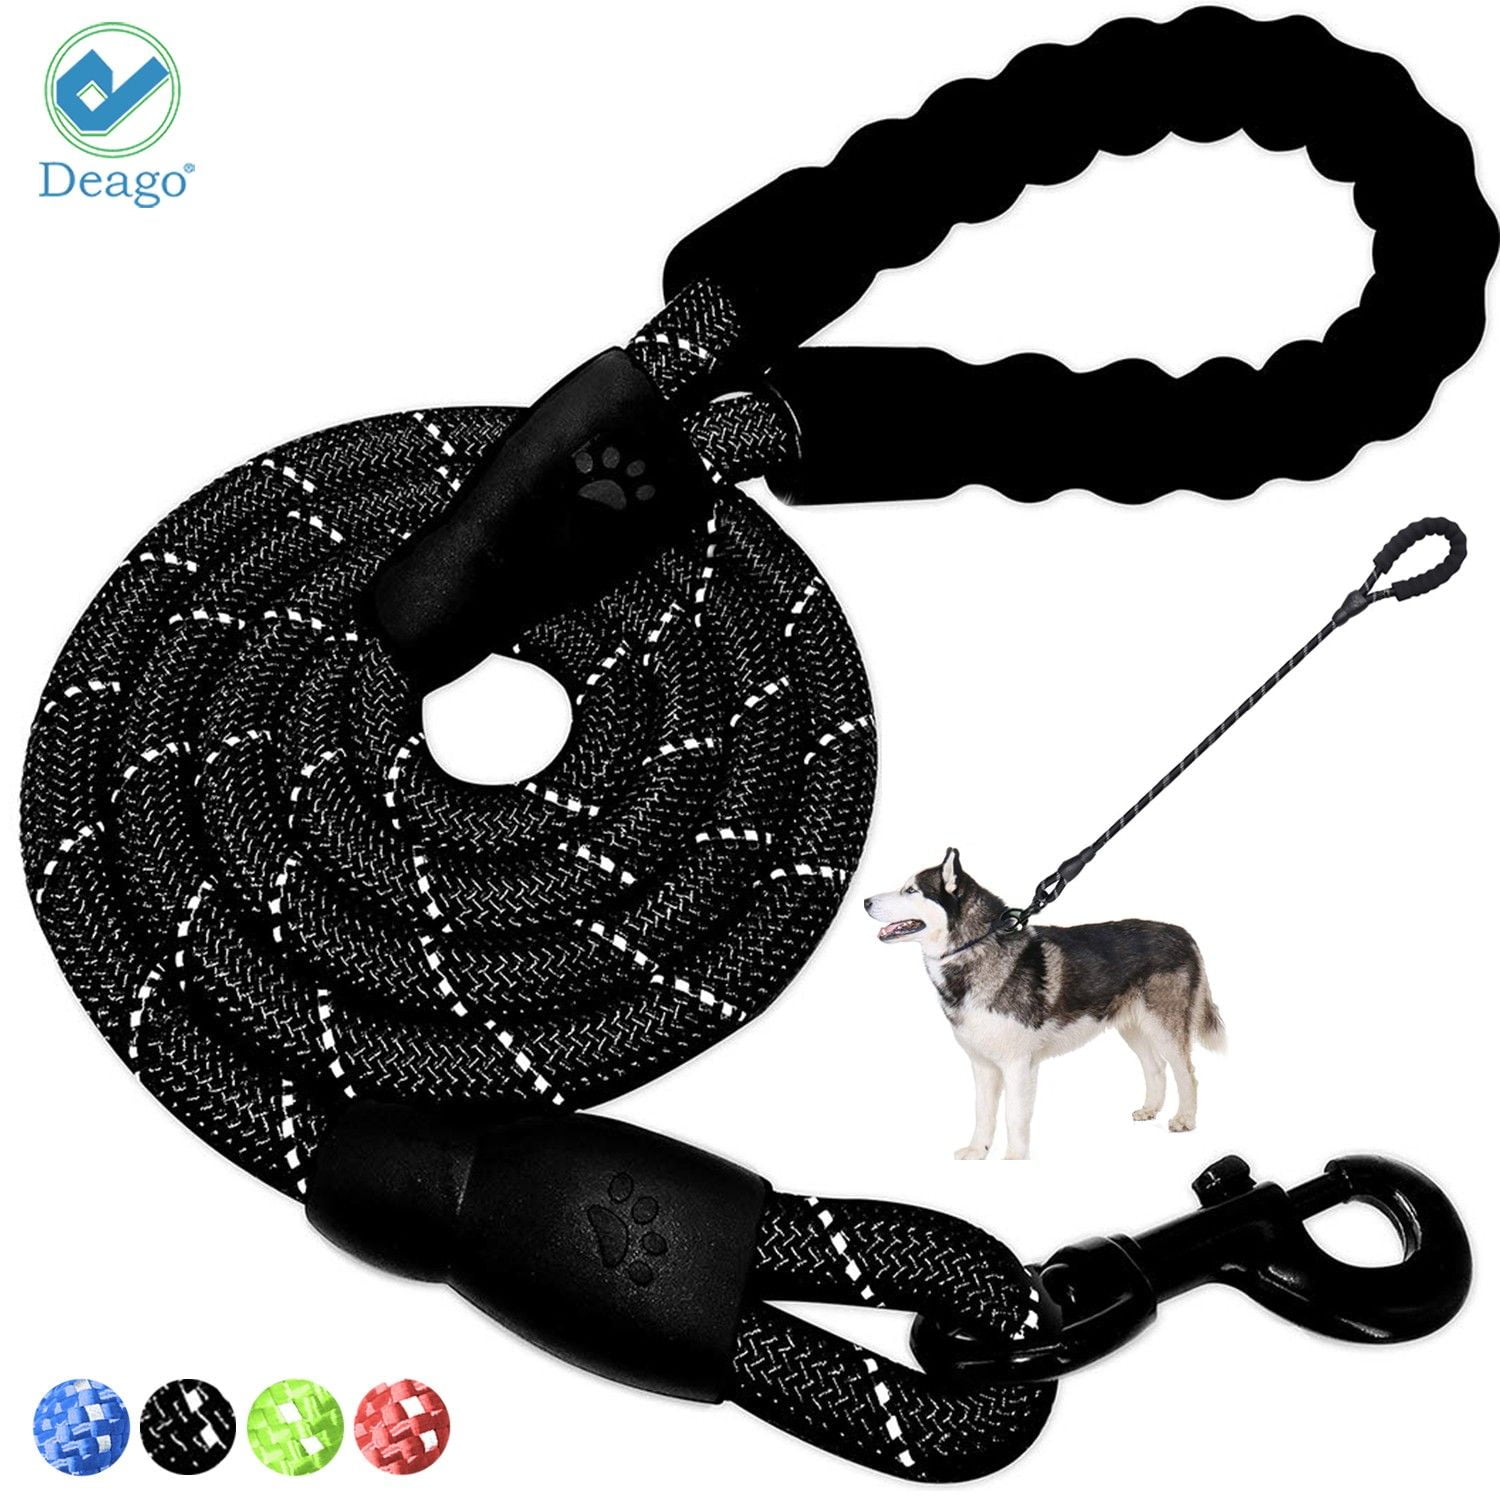 Comfortable Padded Handle Two Sets of Dog Leash 5 FT Thick Durable Nylon Rope Highly Reflective Threads Dog Leashes for Medium and Large Dogs Black Blue 